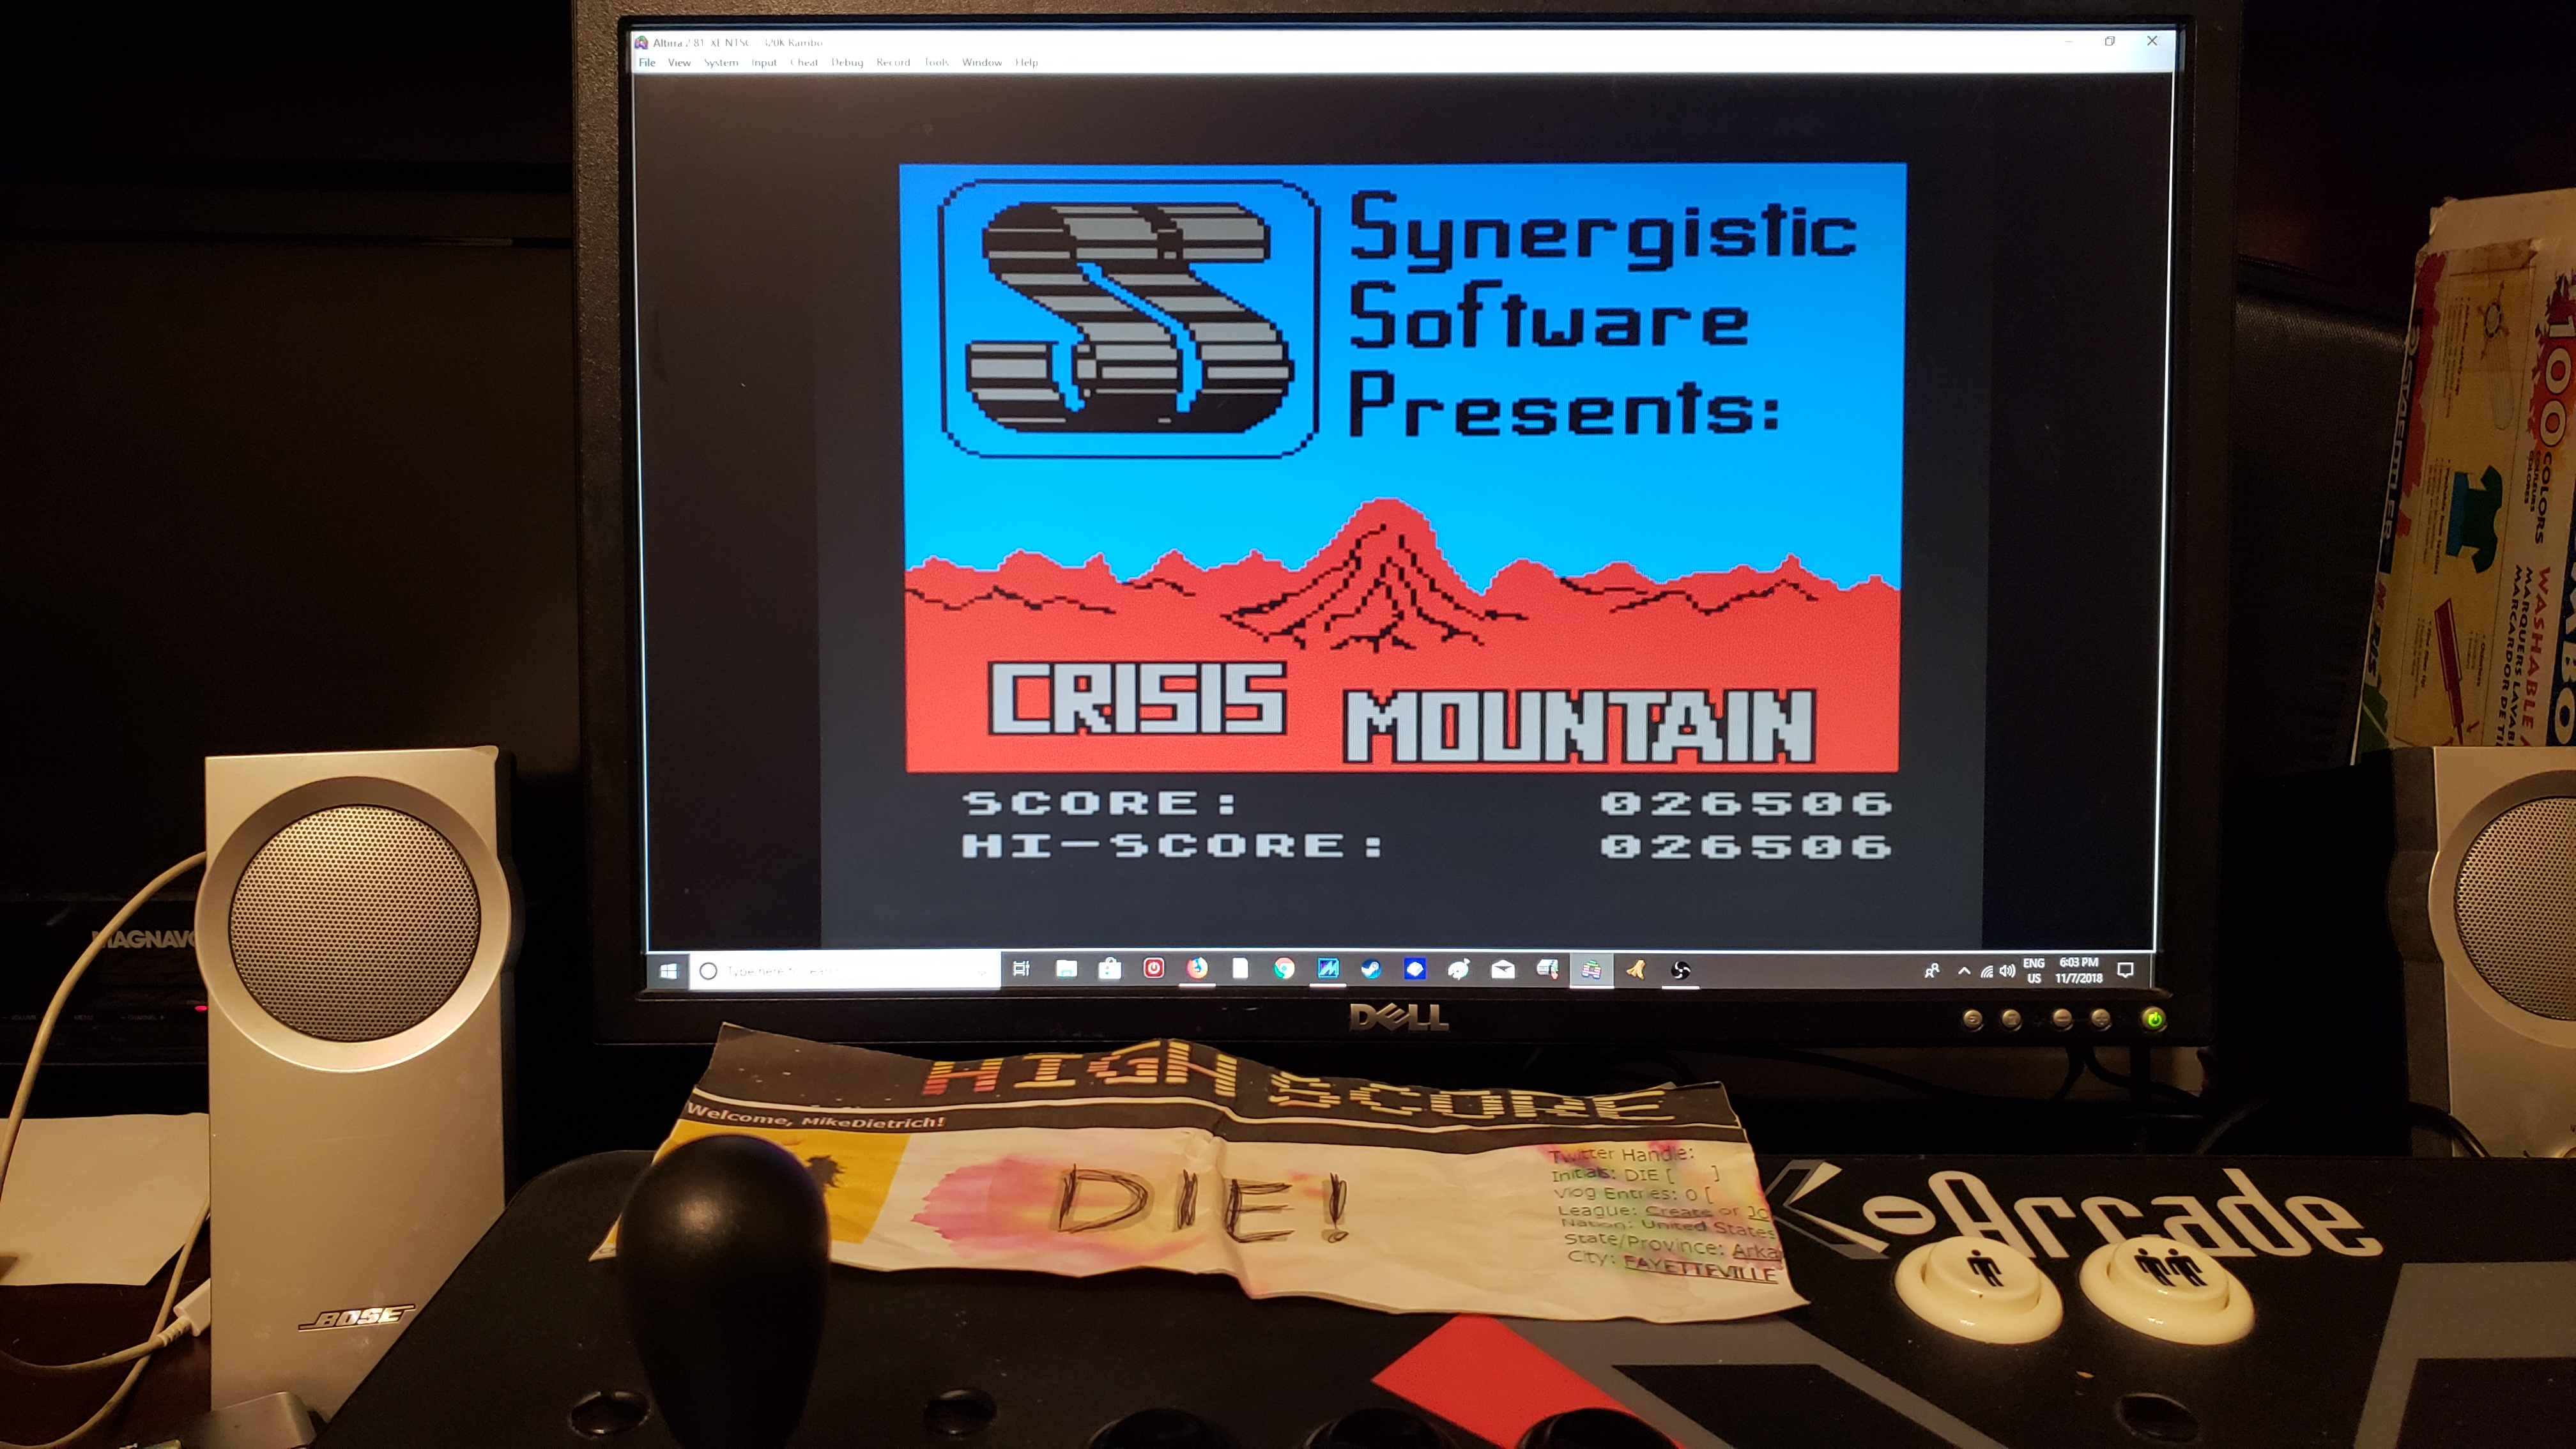 MikeDietrich: Crisis Mountain (Atari 400/800/XL/XE Emulated) 26,506 points on 2018-11-07 17:04:51